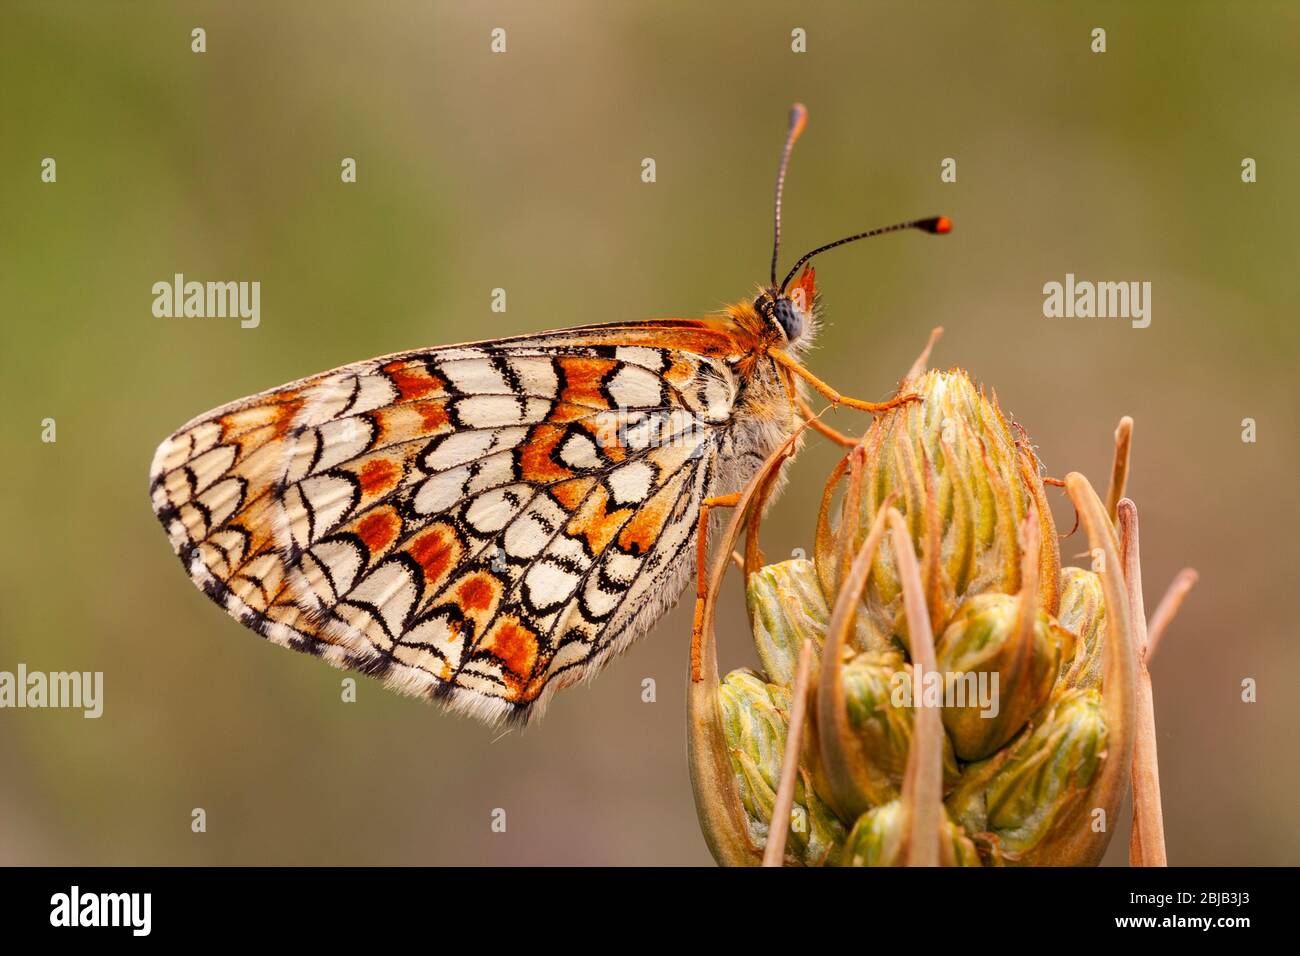 A selective photo of a beautiful butterfly, Melitaea phoebe perched on a flower against a defocused green background. Spain Stock Photo